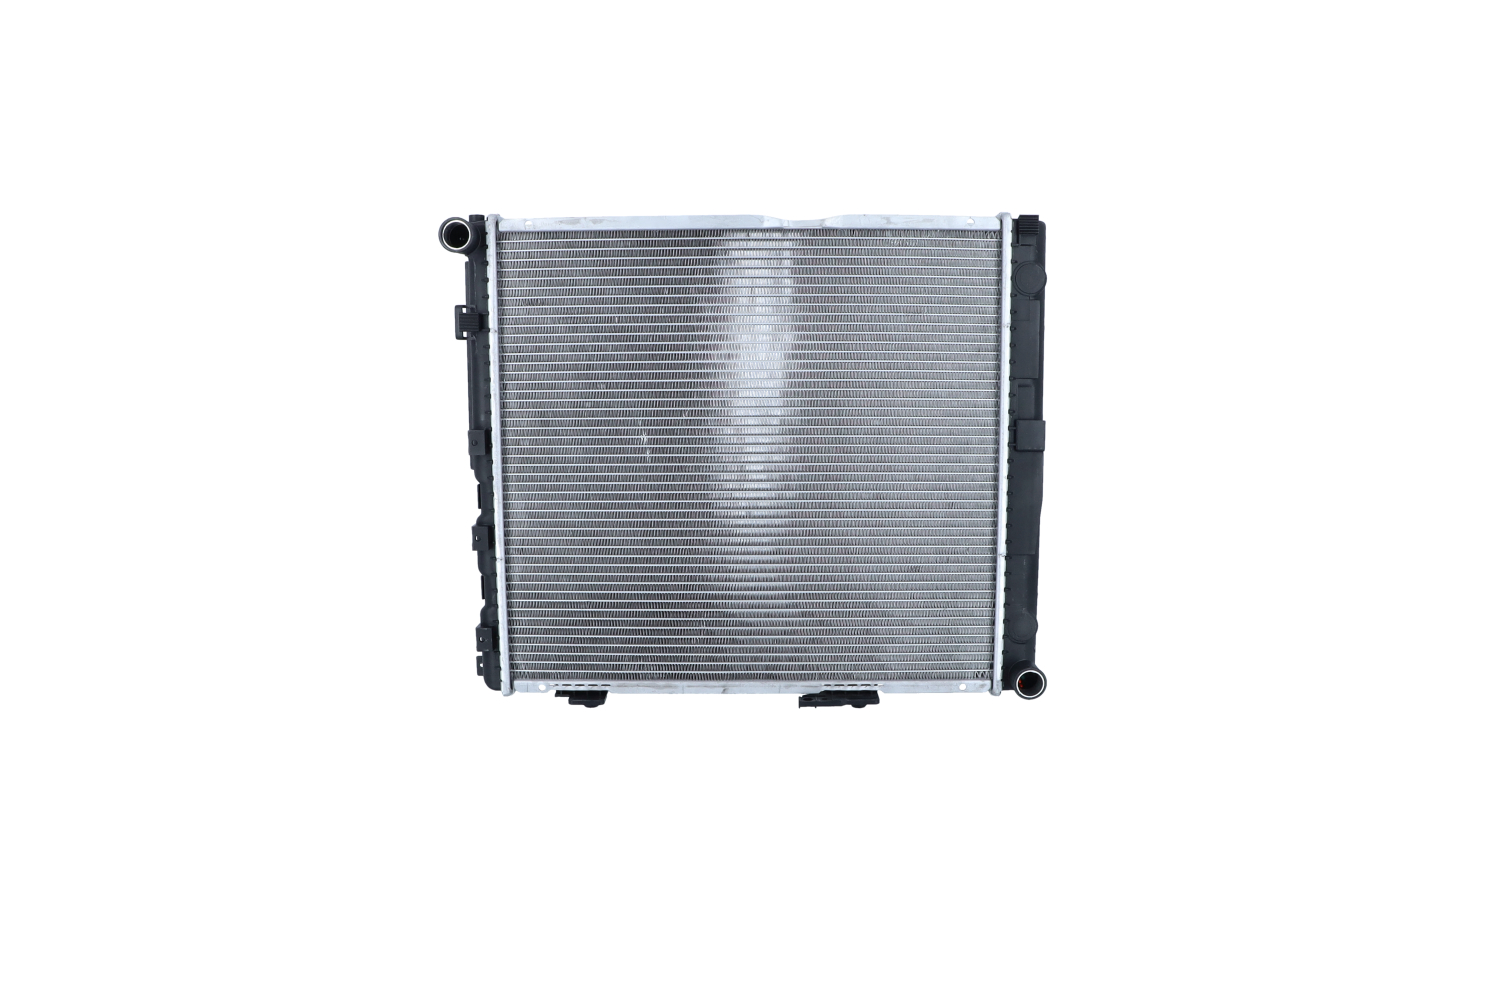 NRF 53874 Engine radiator Aluminium, 533 x 485 x 34 mm, with mounting parts, Brazed cooling fins